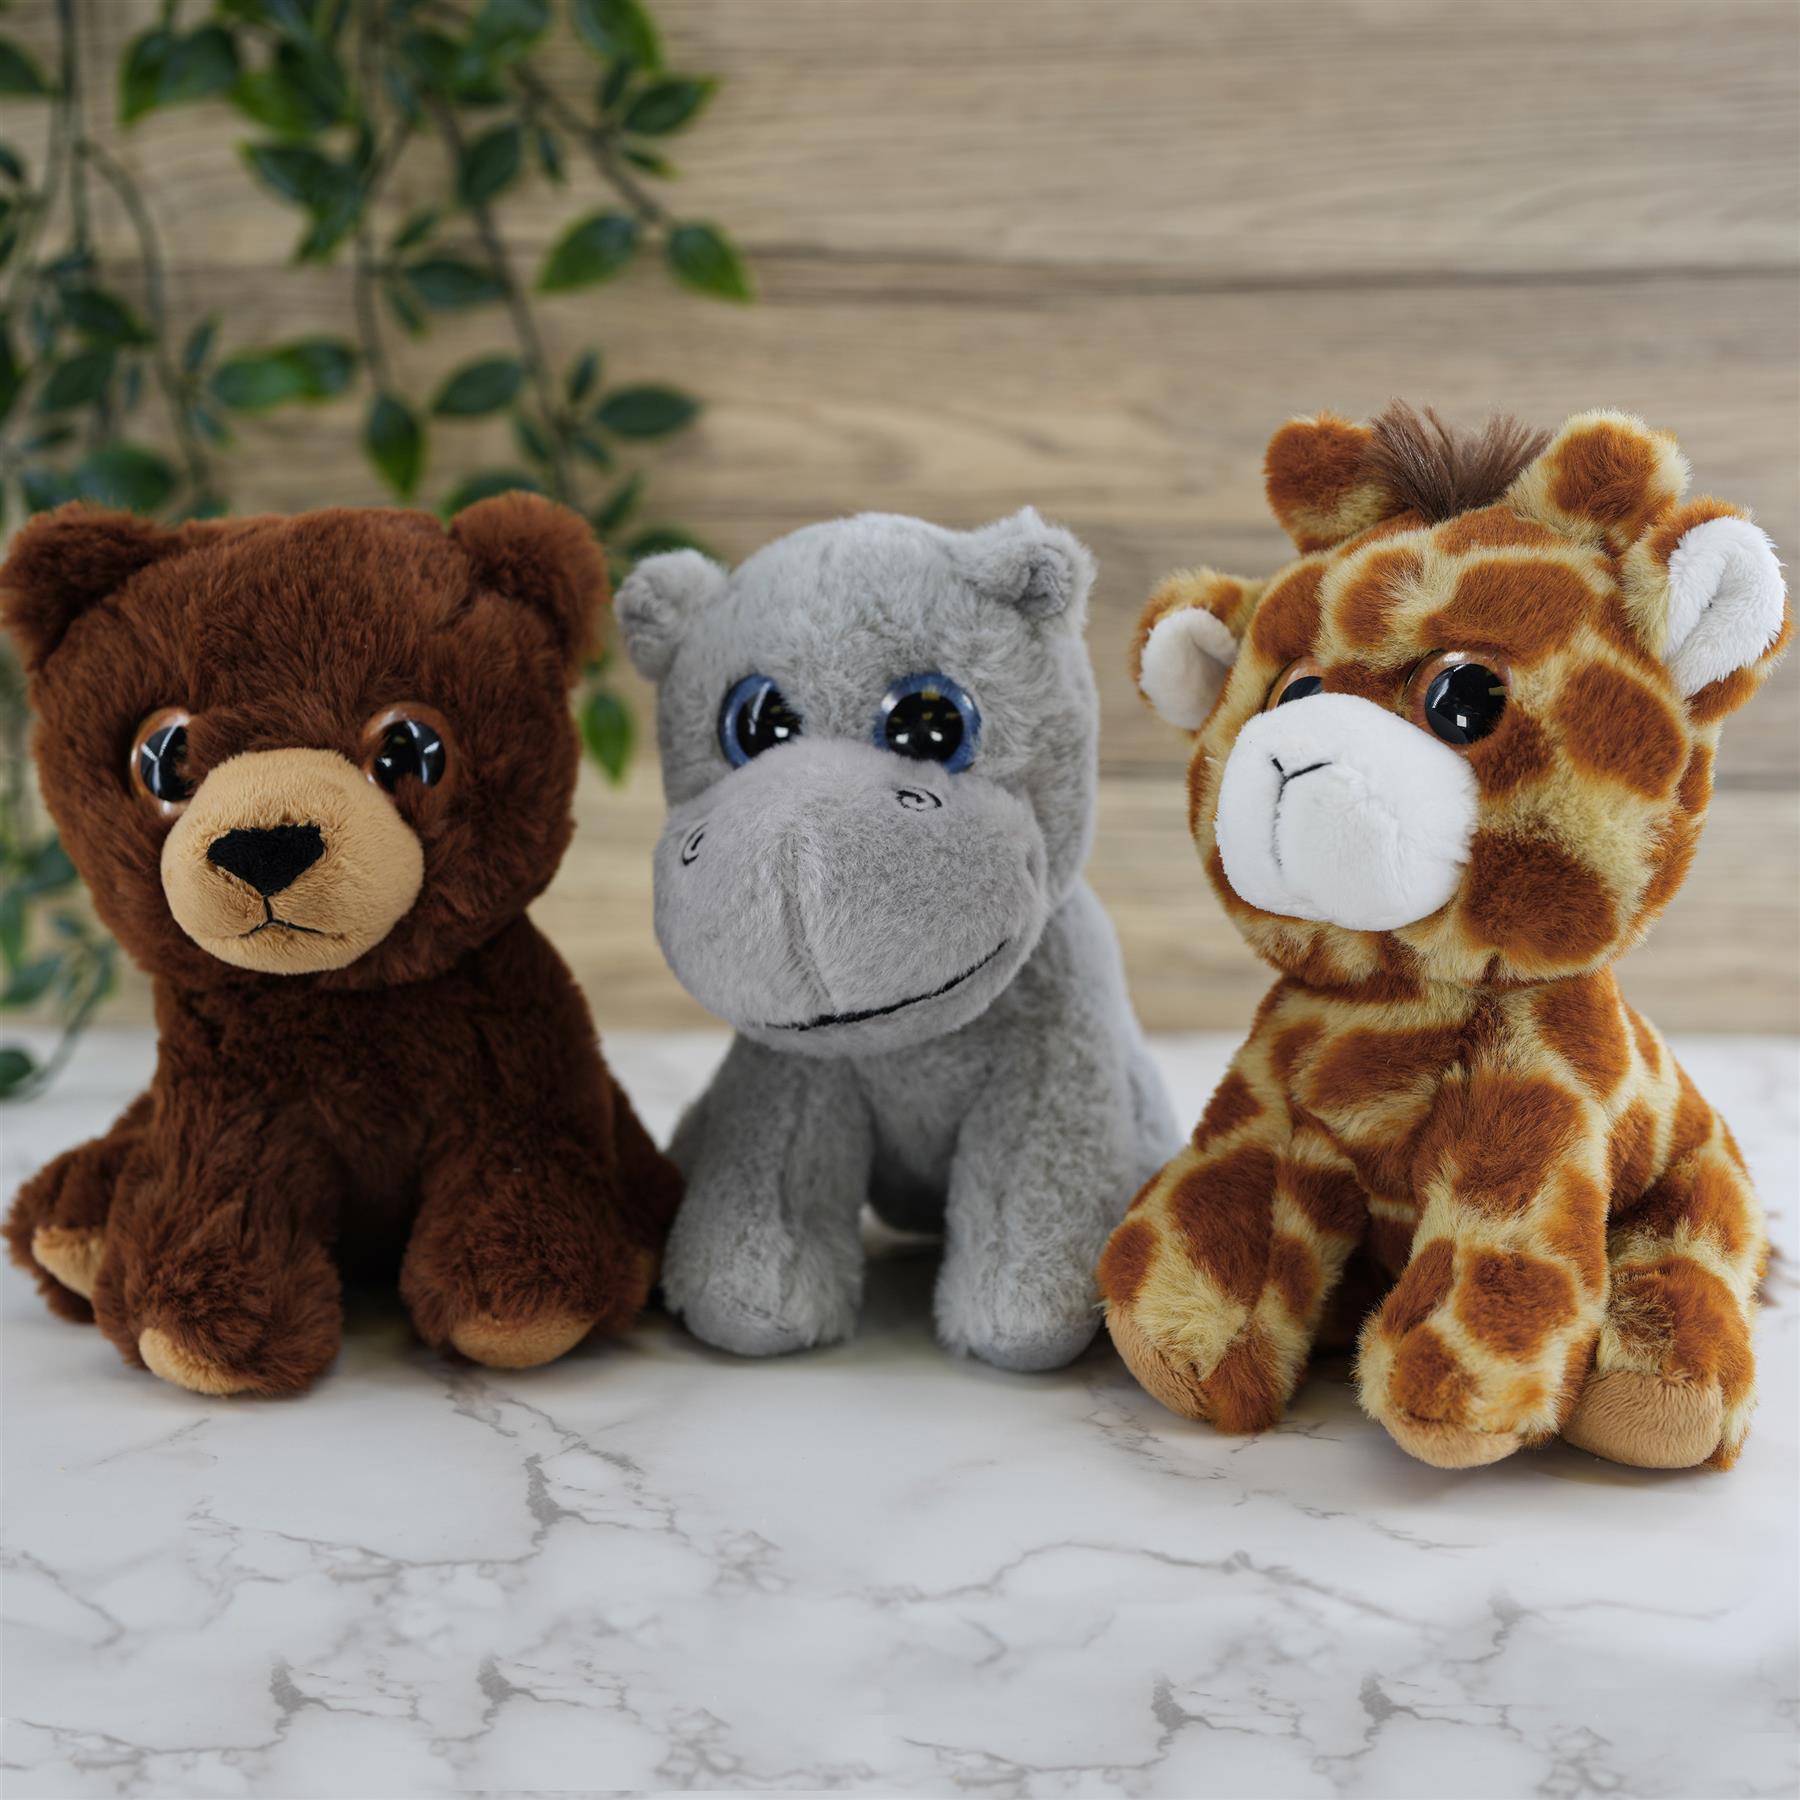 Set of 6 Soft Plush Animals Toys by The Magic Toy ShopThe Magic Toy Shop